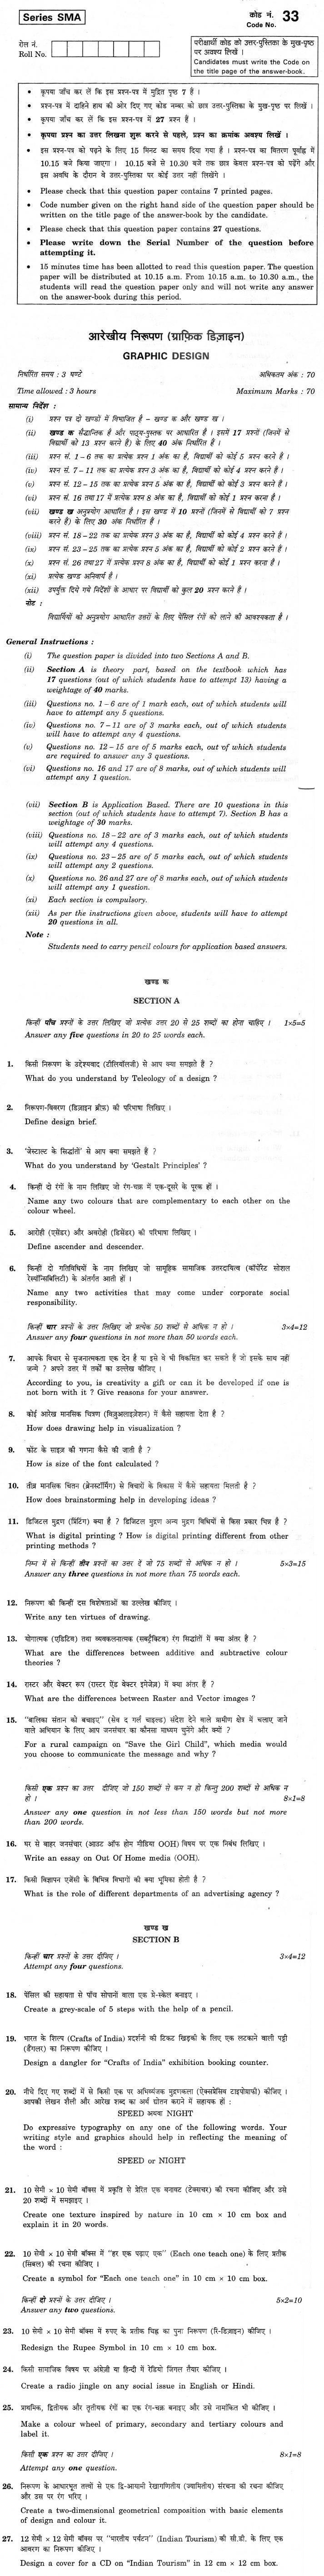 CBSE Class XII Previous Year Question Paper 2012: Graphics Design